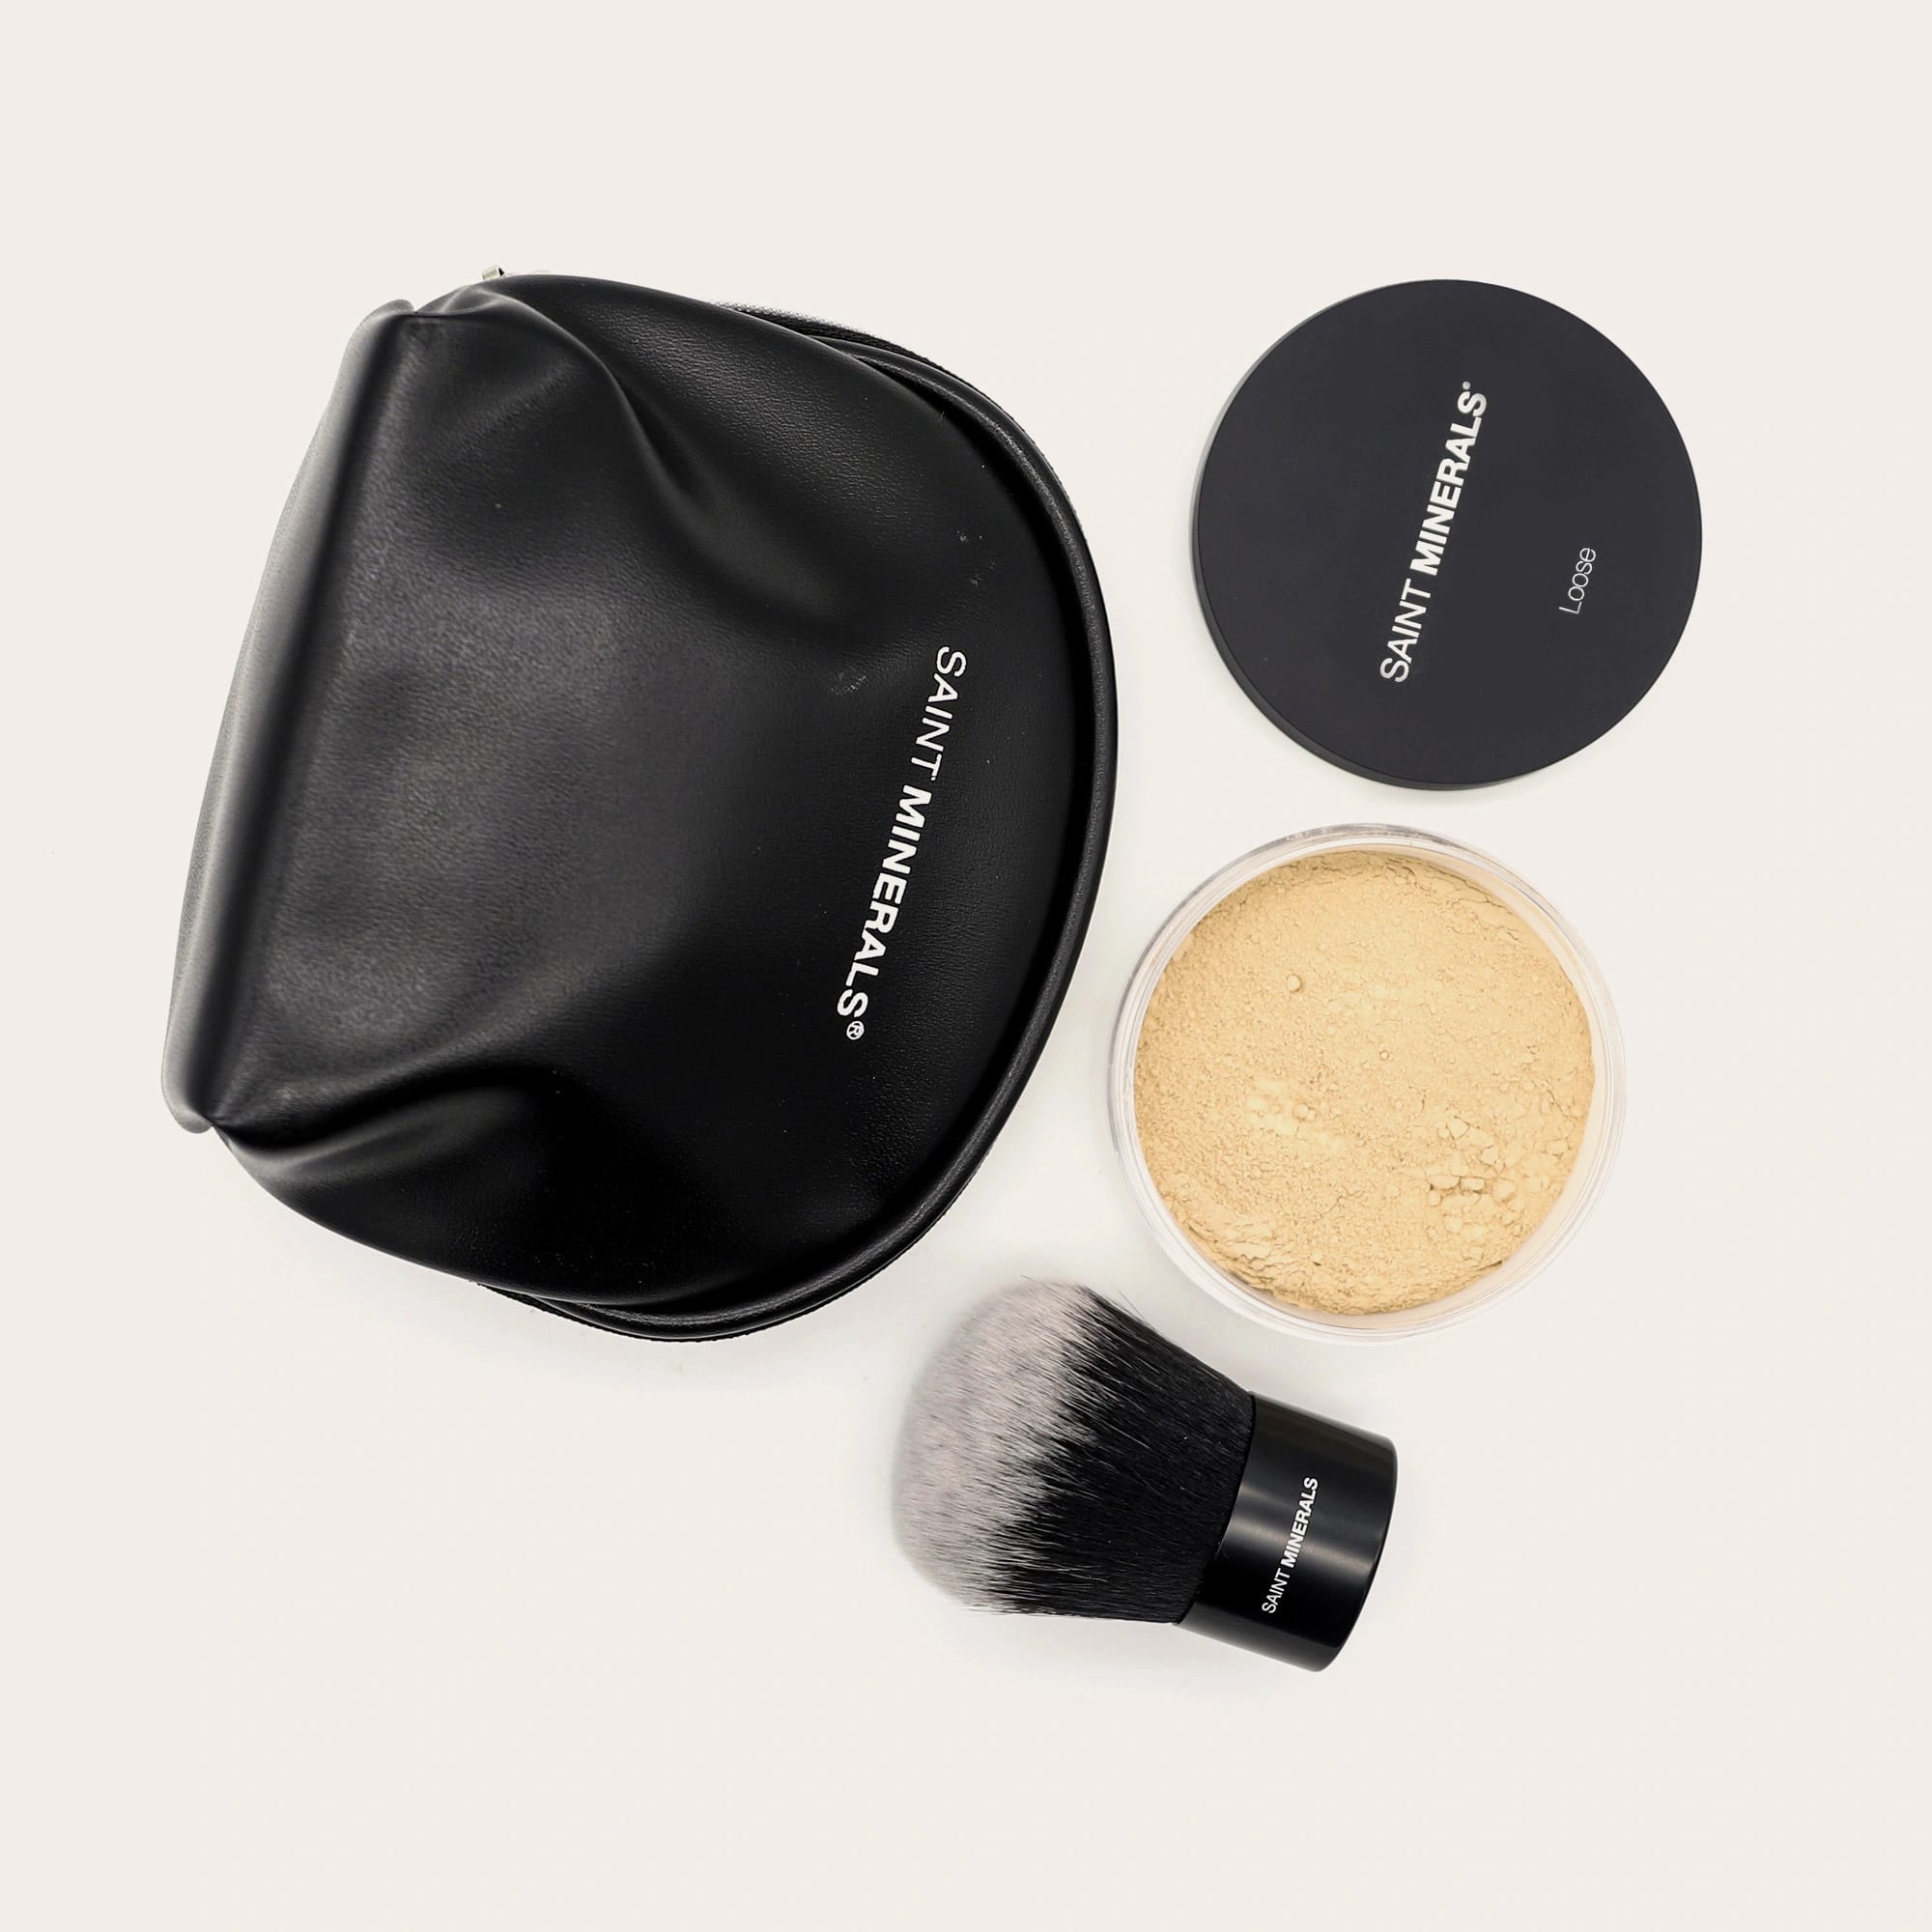 Saint Minerals Makeup BFF Pack Limited Edition (Loose Powder #3) - Exquisite Laser Clinic 